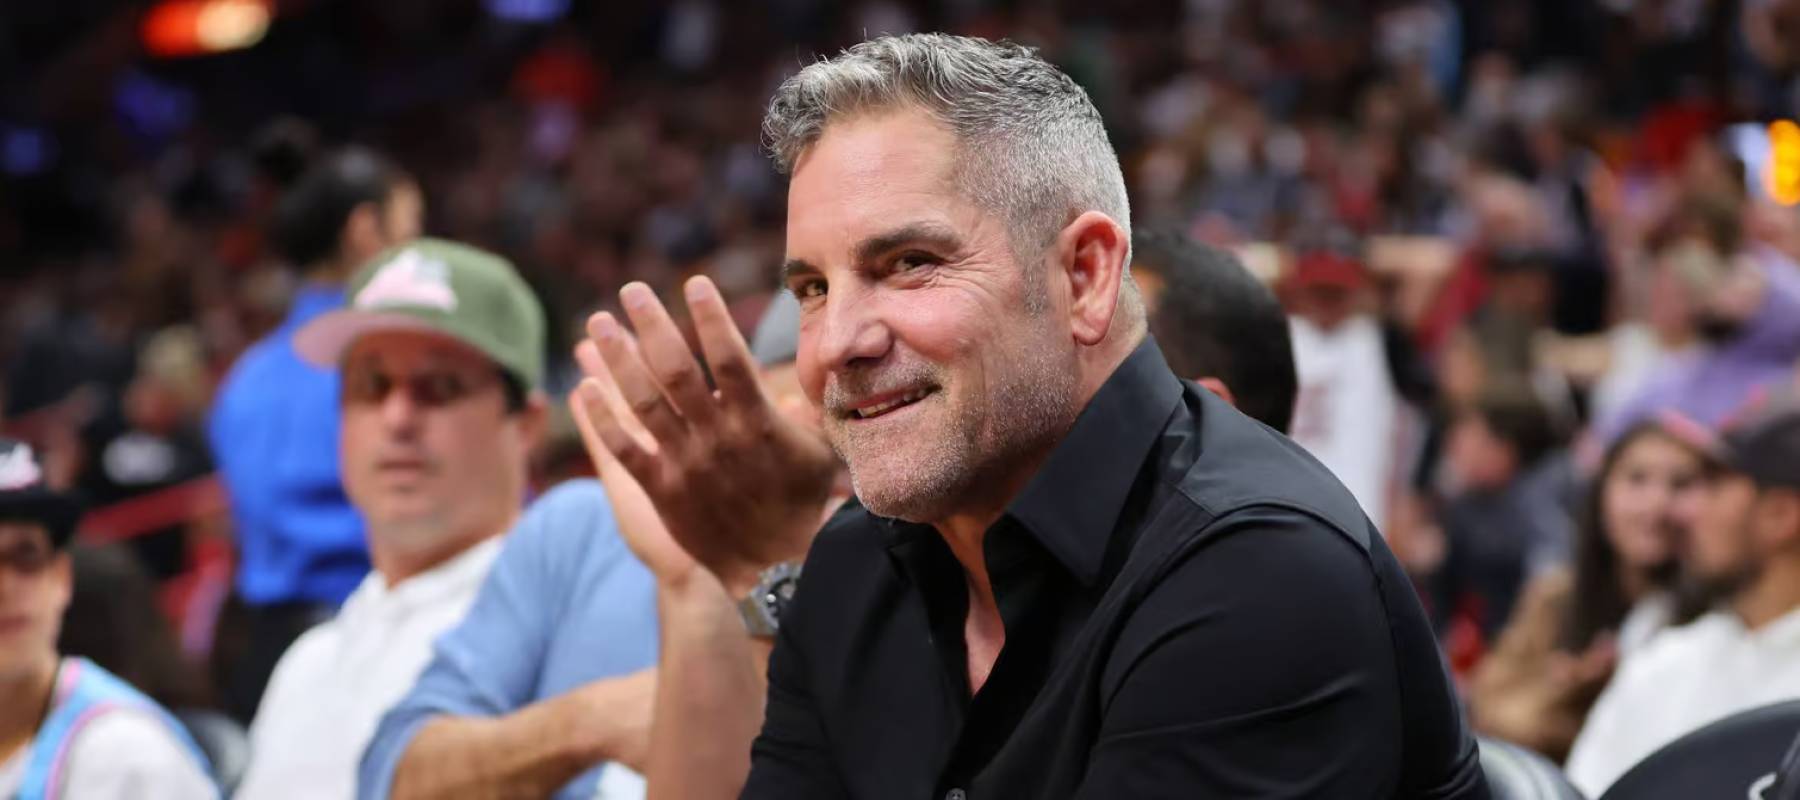 Grant Cardone attends an NBA game between the Miami Heat and Minnesota Timberwolves at FTX Arena in Miami, Florida, on March 12, 2022. (Michael Reaves/Getty Images)